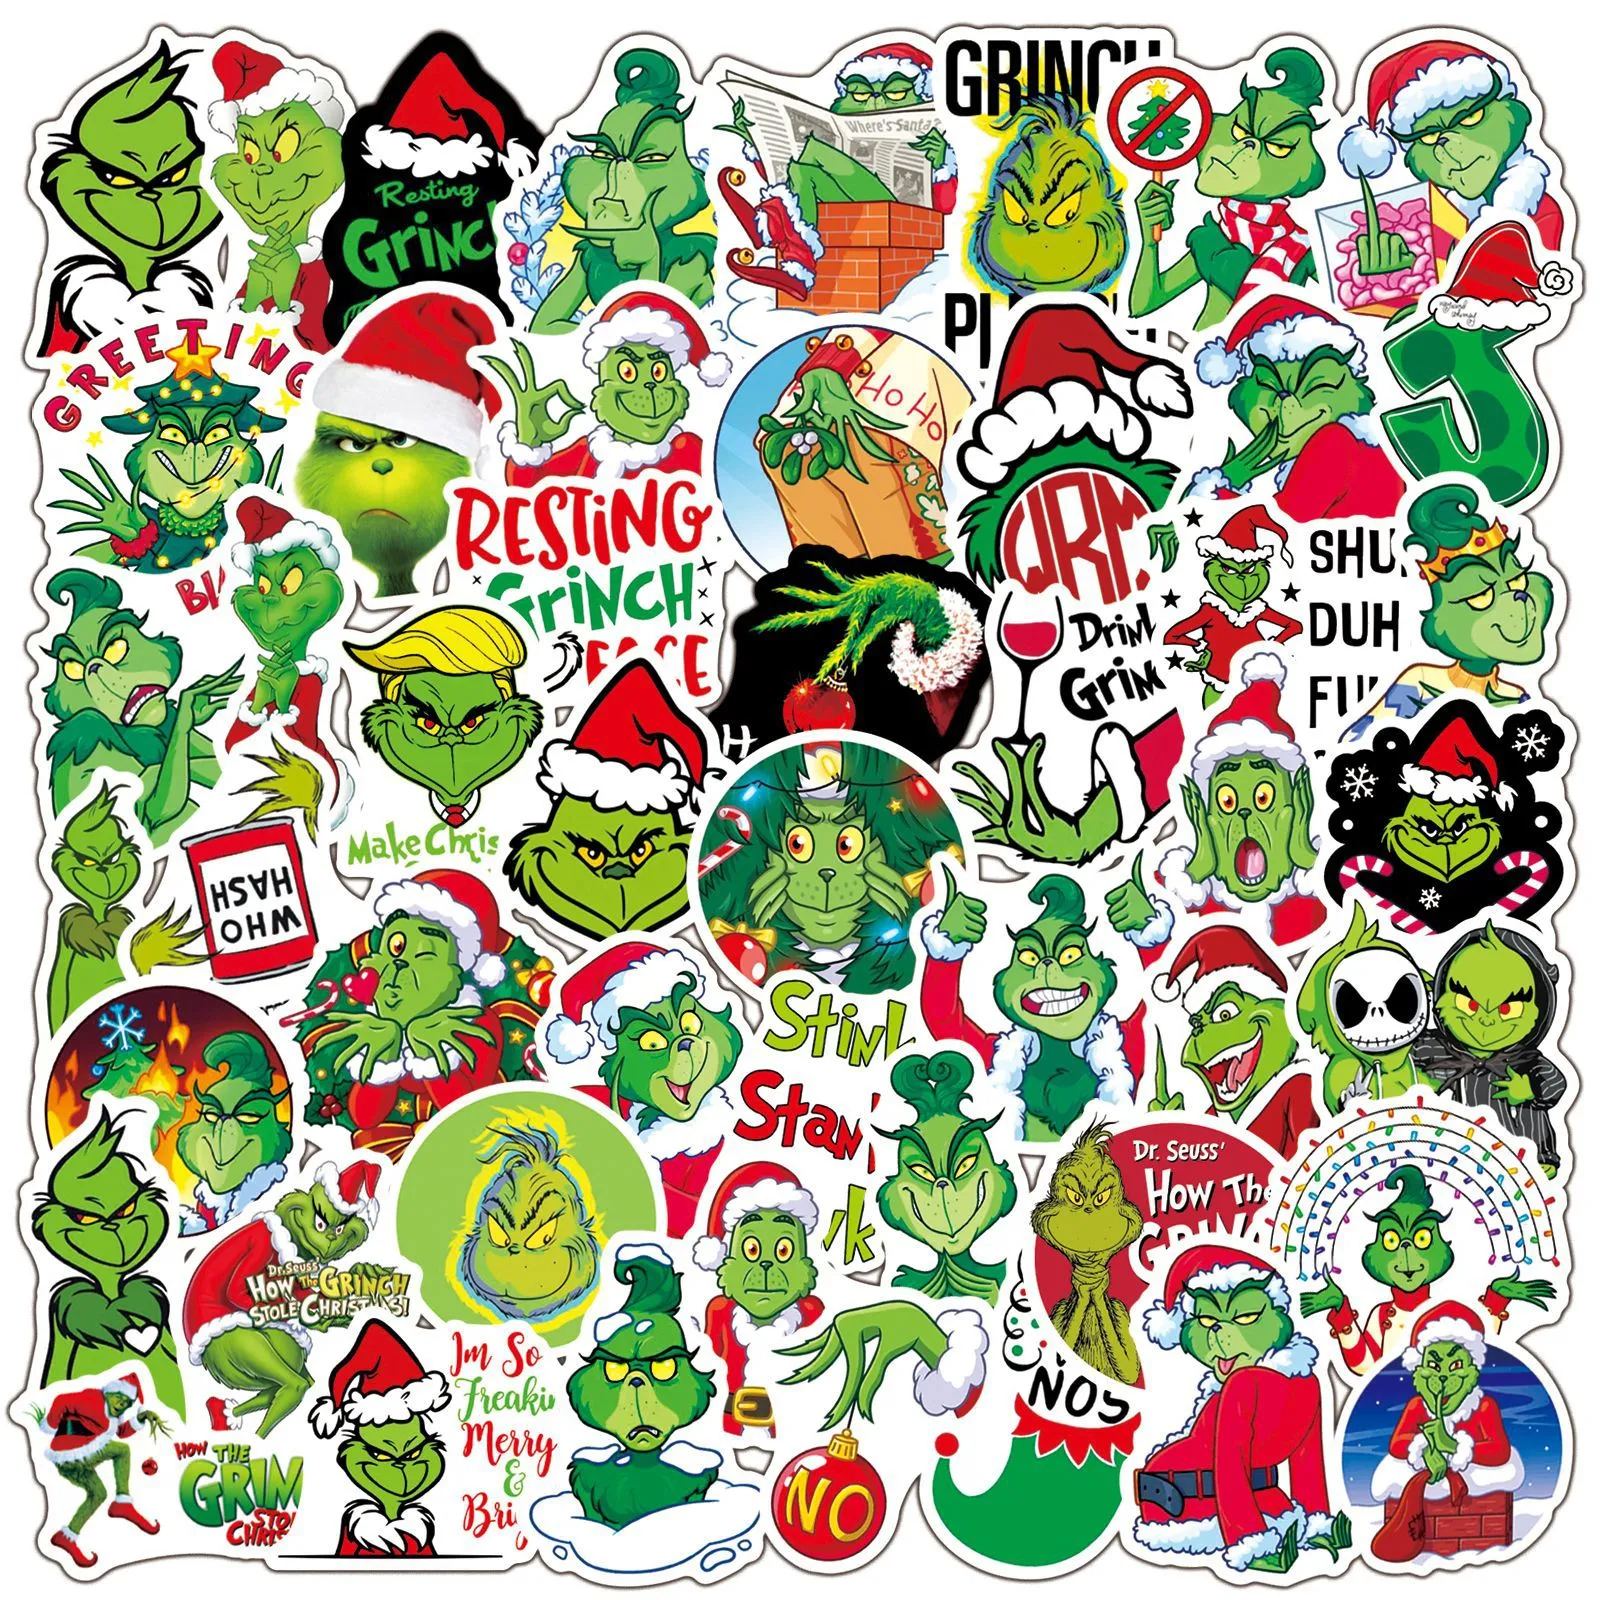 50/100 Cool Christmas And Halloween Graffiti Stickers For Skateboards,  Motorcycles, Laptops, Phones, Cars, And Luggage From Phonecase_2023, $4.16